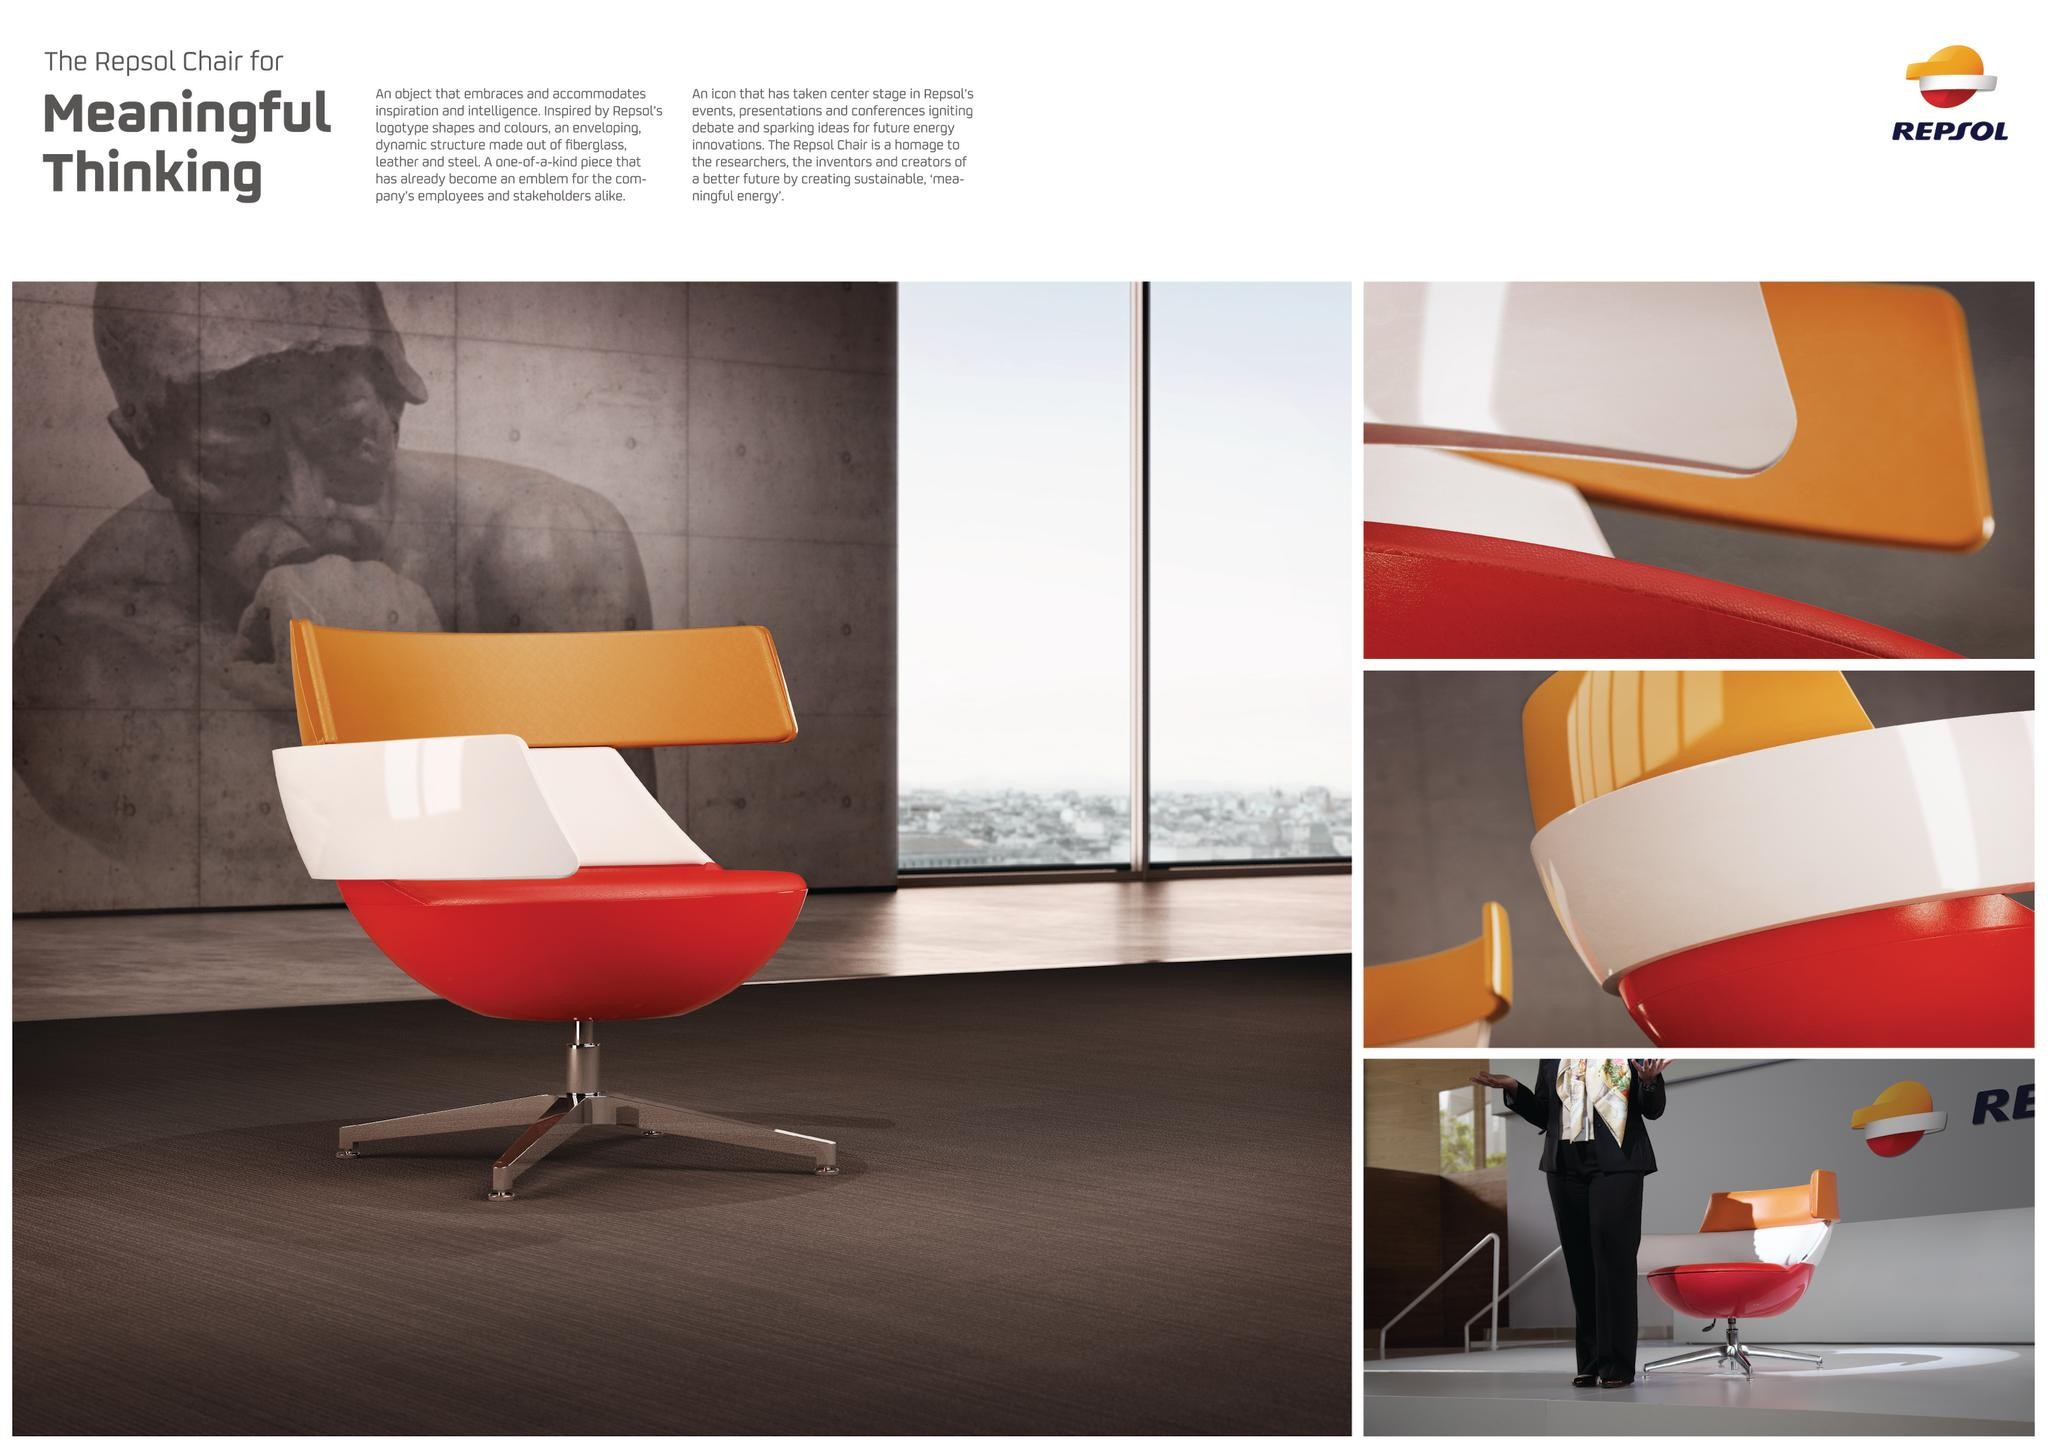 THE REPSOL CHAIR (FOR MEANINGFUL THINKING)